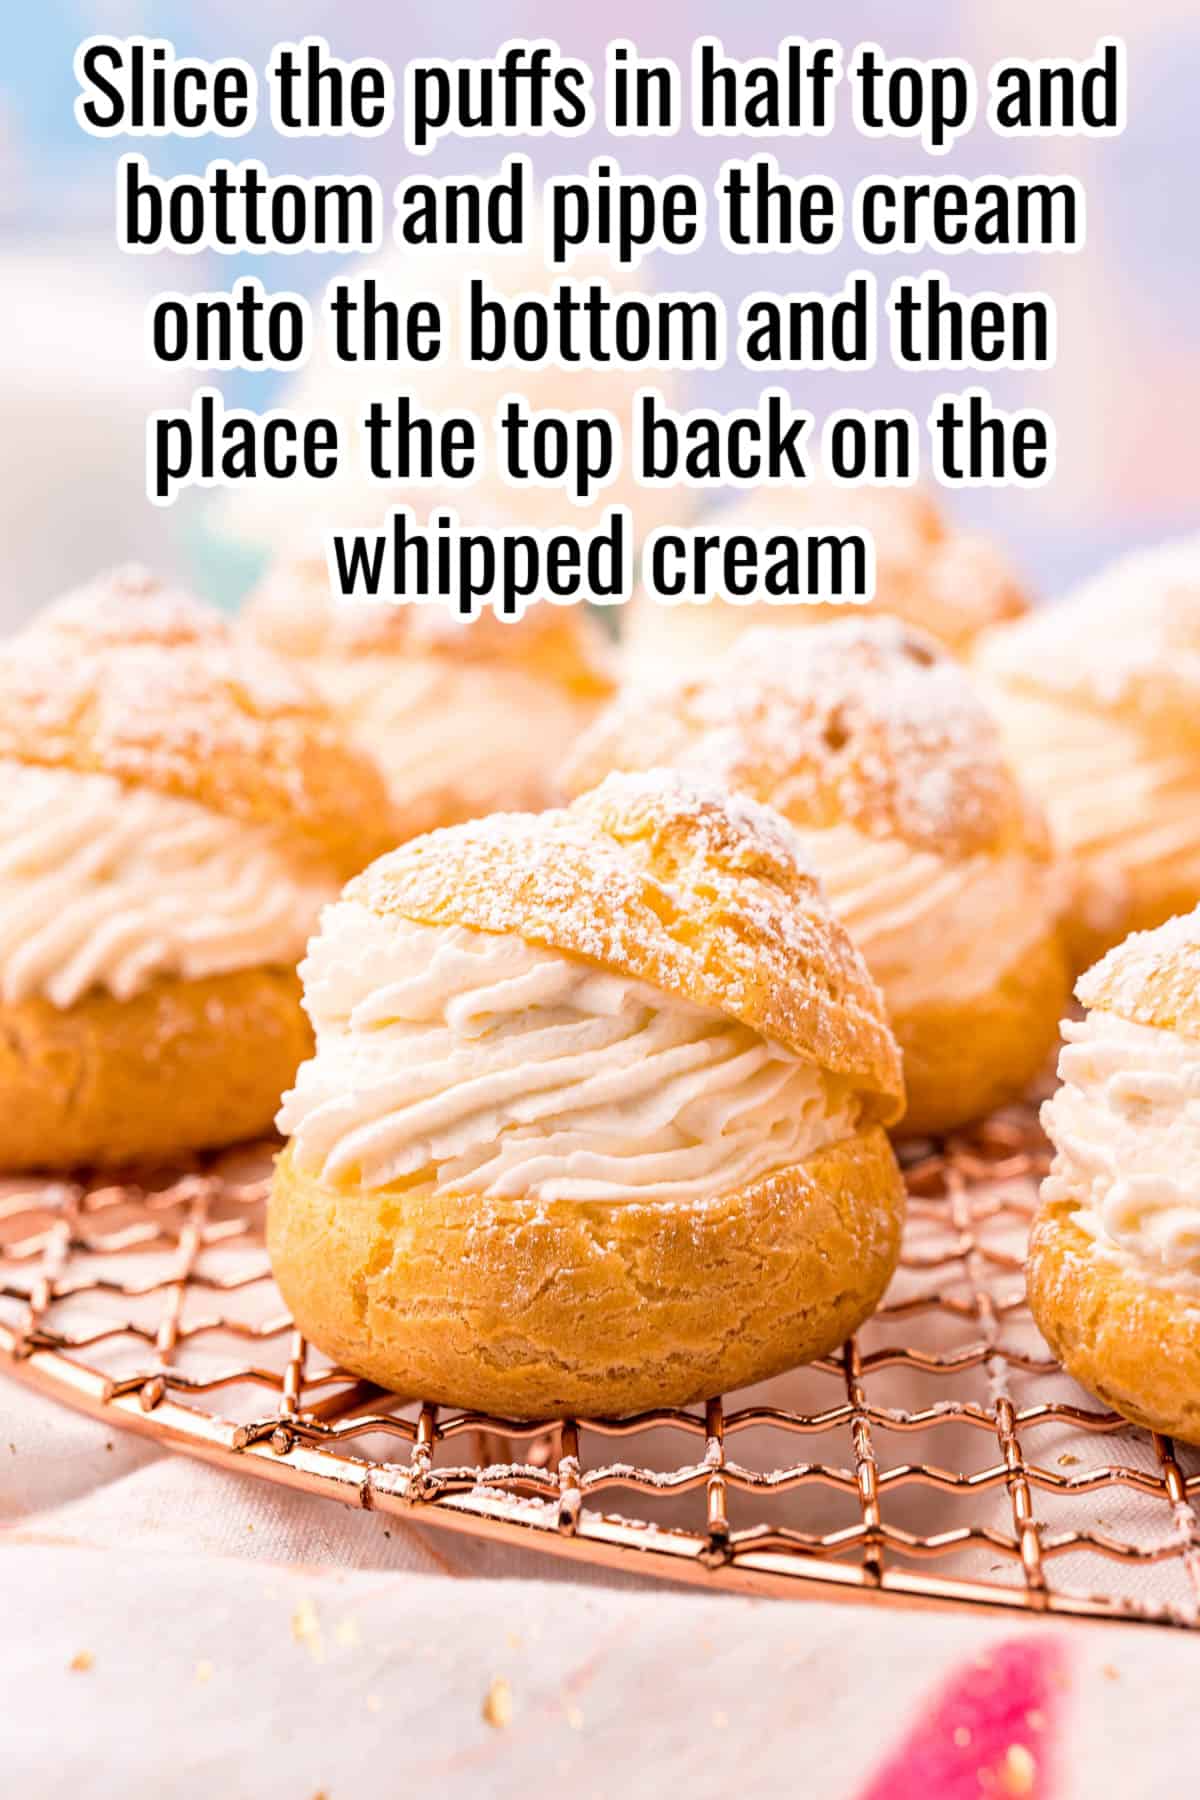 baked cream puff with whipped cream filling on a wire rack.